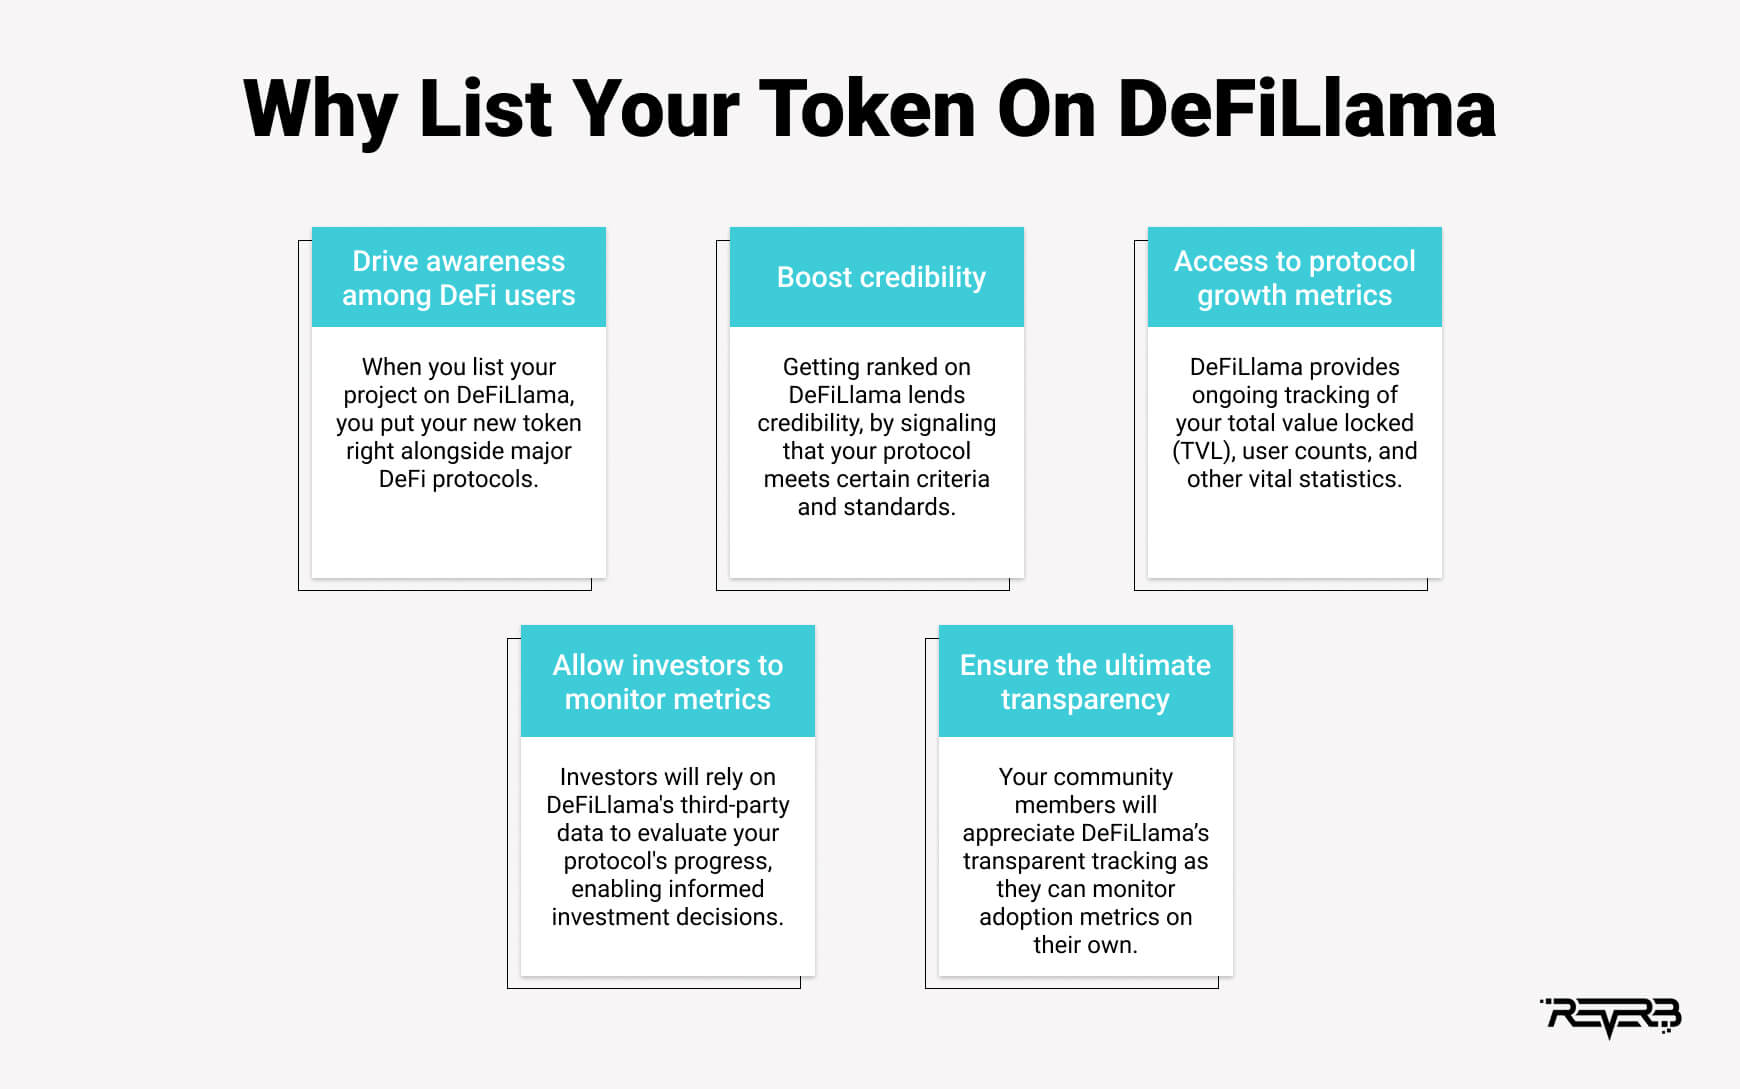 Why List Your Token On DeFiLlama